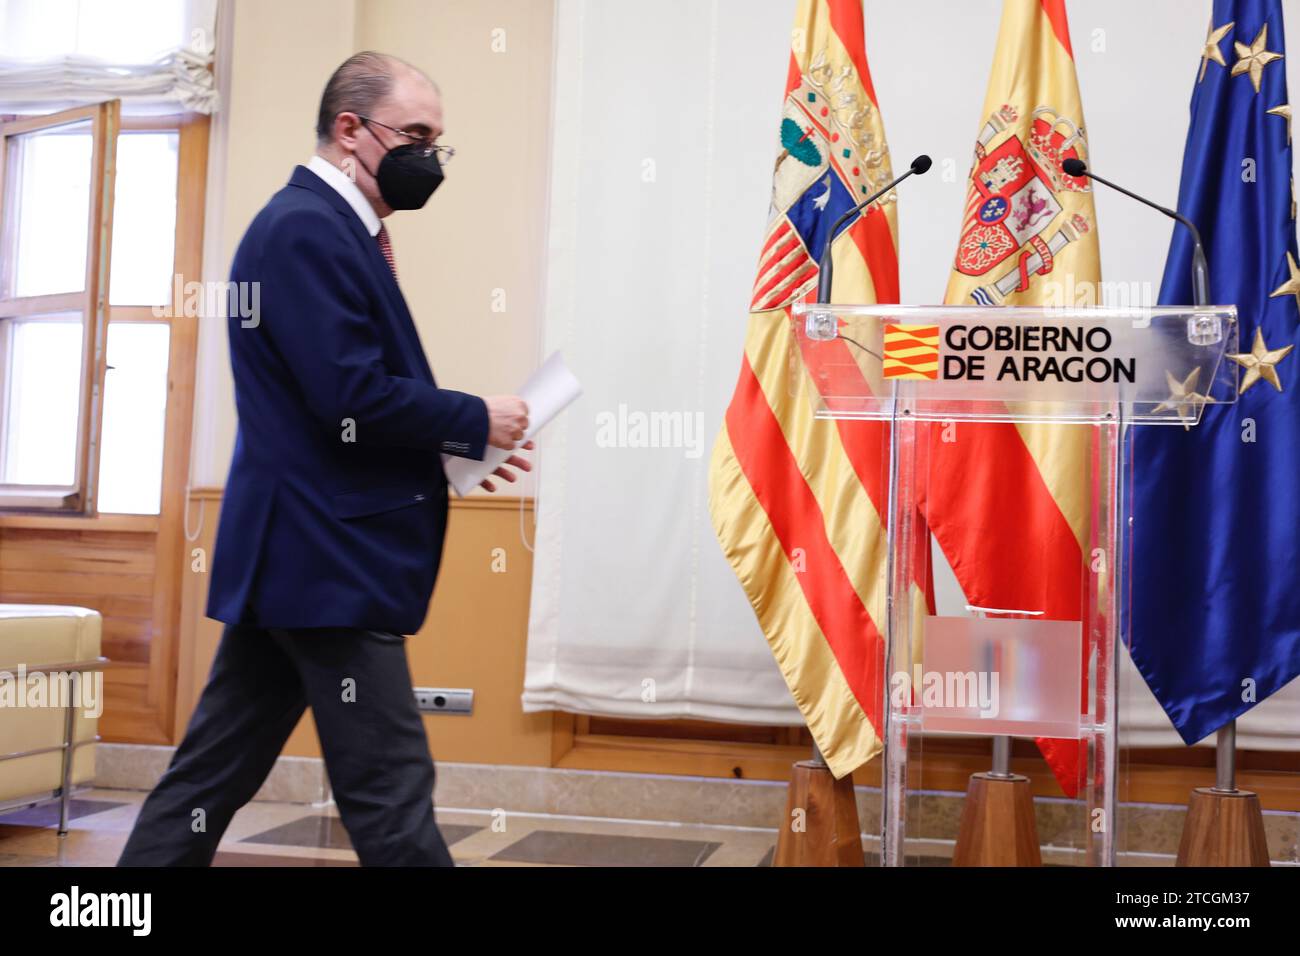 Zaragoza, 02/15/2021. The President of the Aragonese Government, Javier Lambán, announces that he has been diagnosed with colon cancer and that he is going to undergo treatment. Photo: Fabián Simón. ARCHDC. Credit: Album / Archivo ABC / Fabián Simón Stock Photo